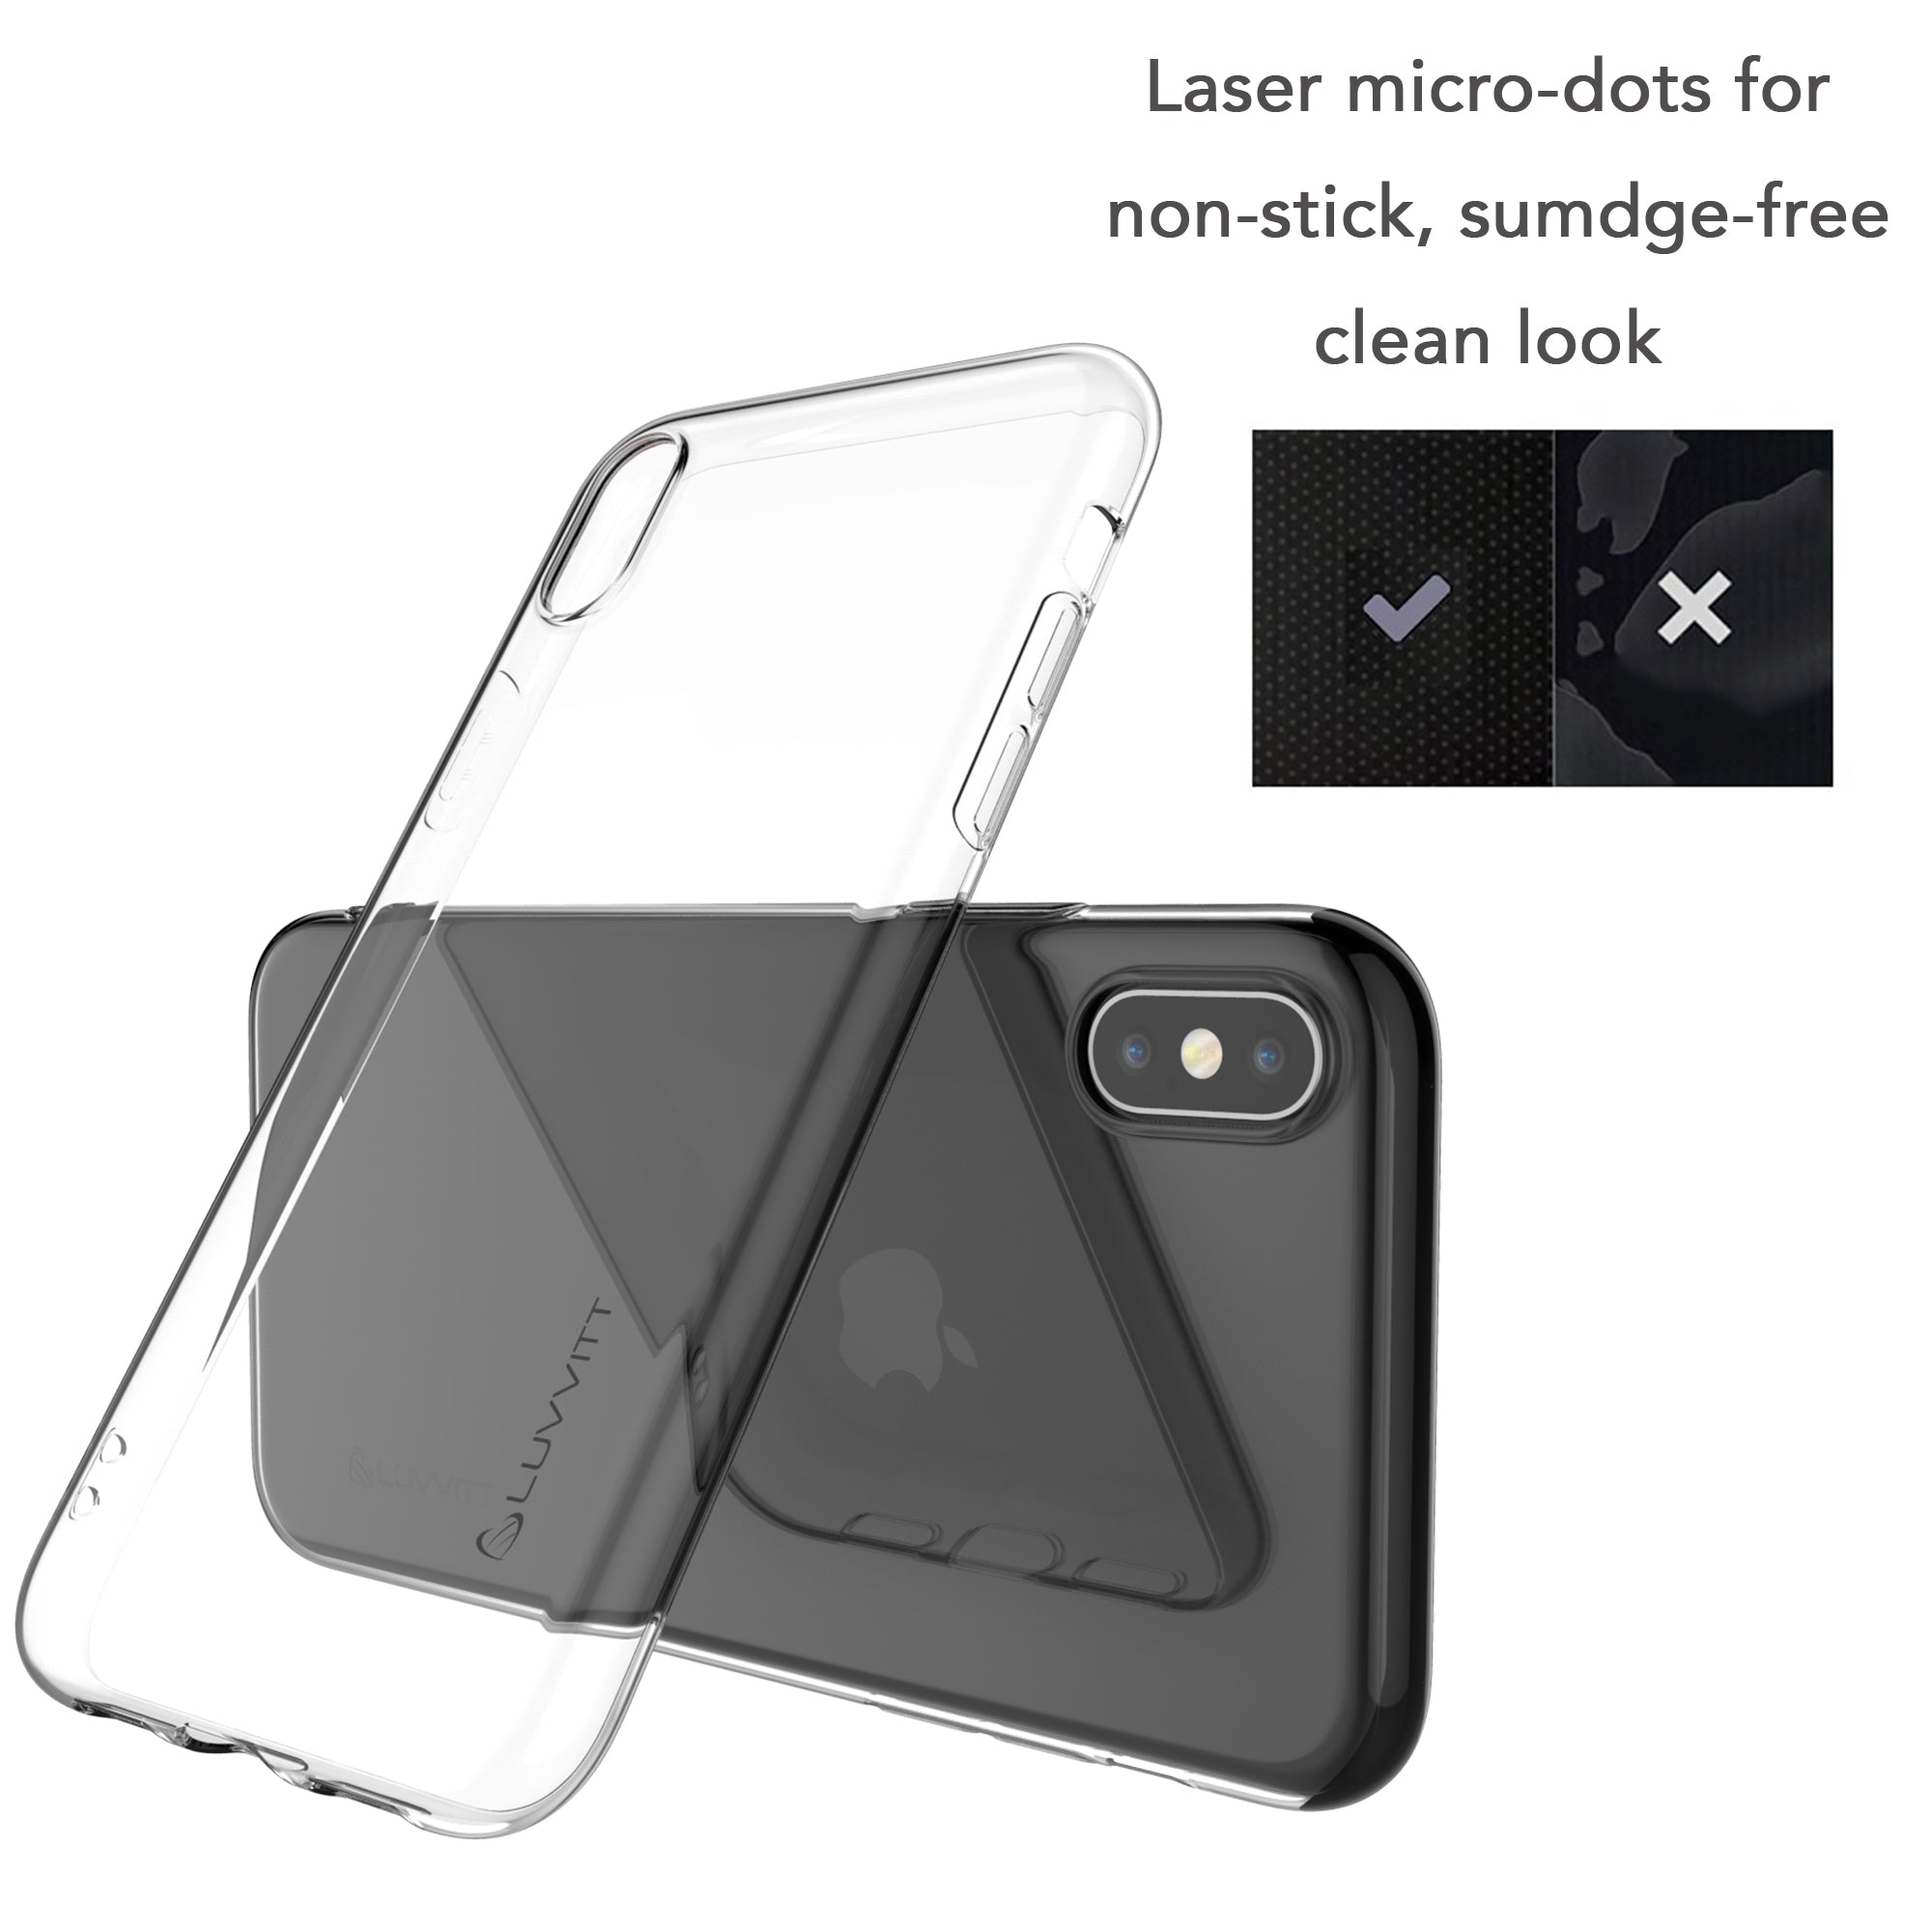 Luvvitt iPhone XS Max Case Clarity Flexible TPU for 6.5 inch Screen 2018 - Clear